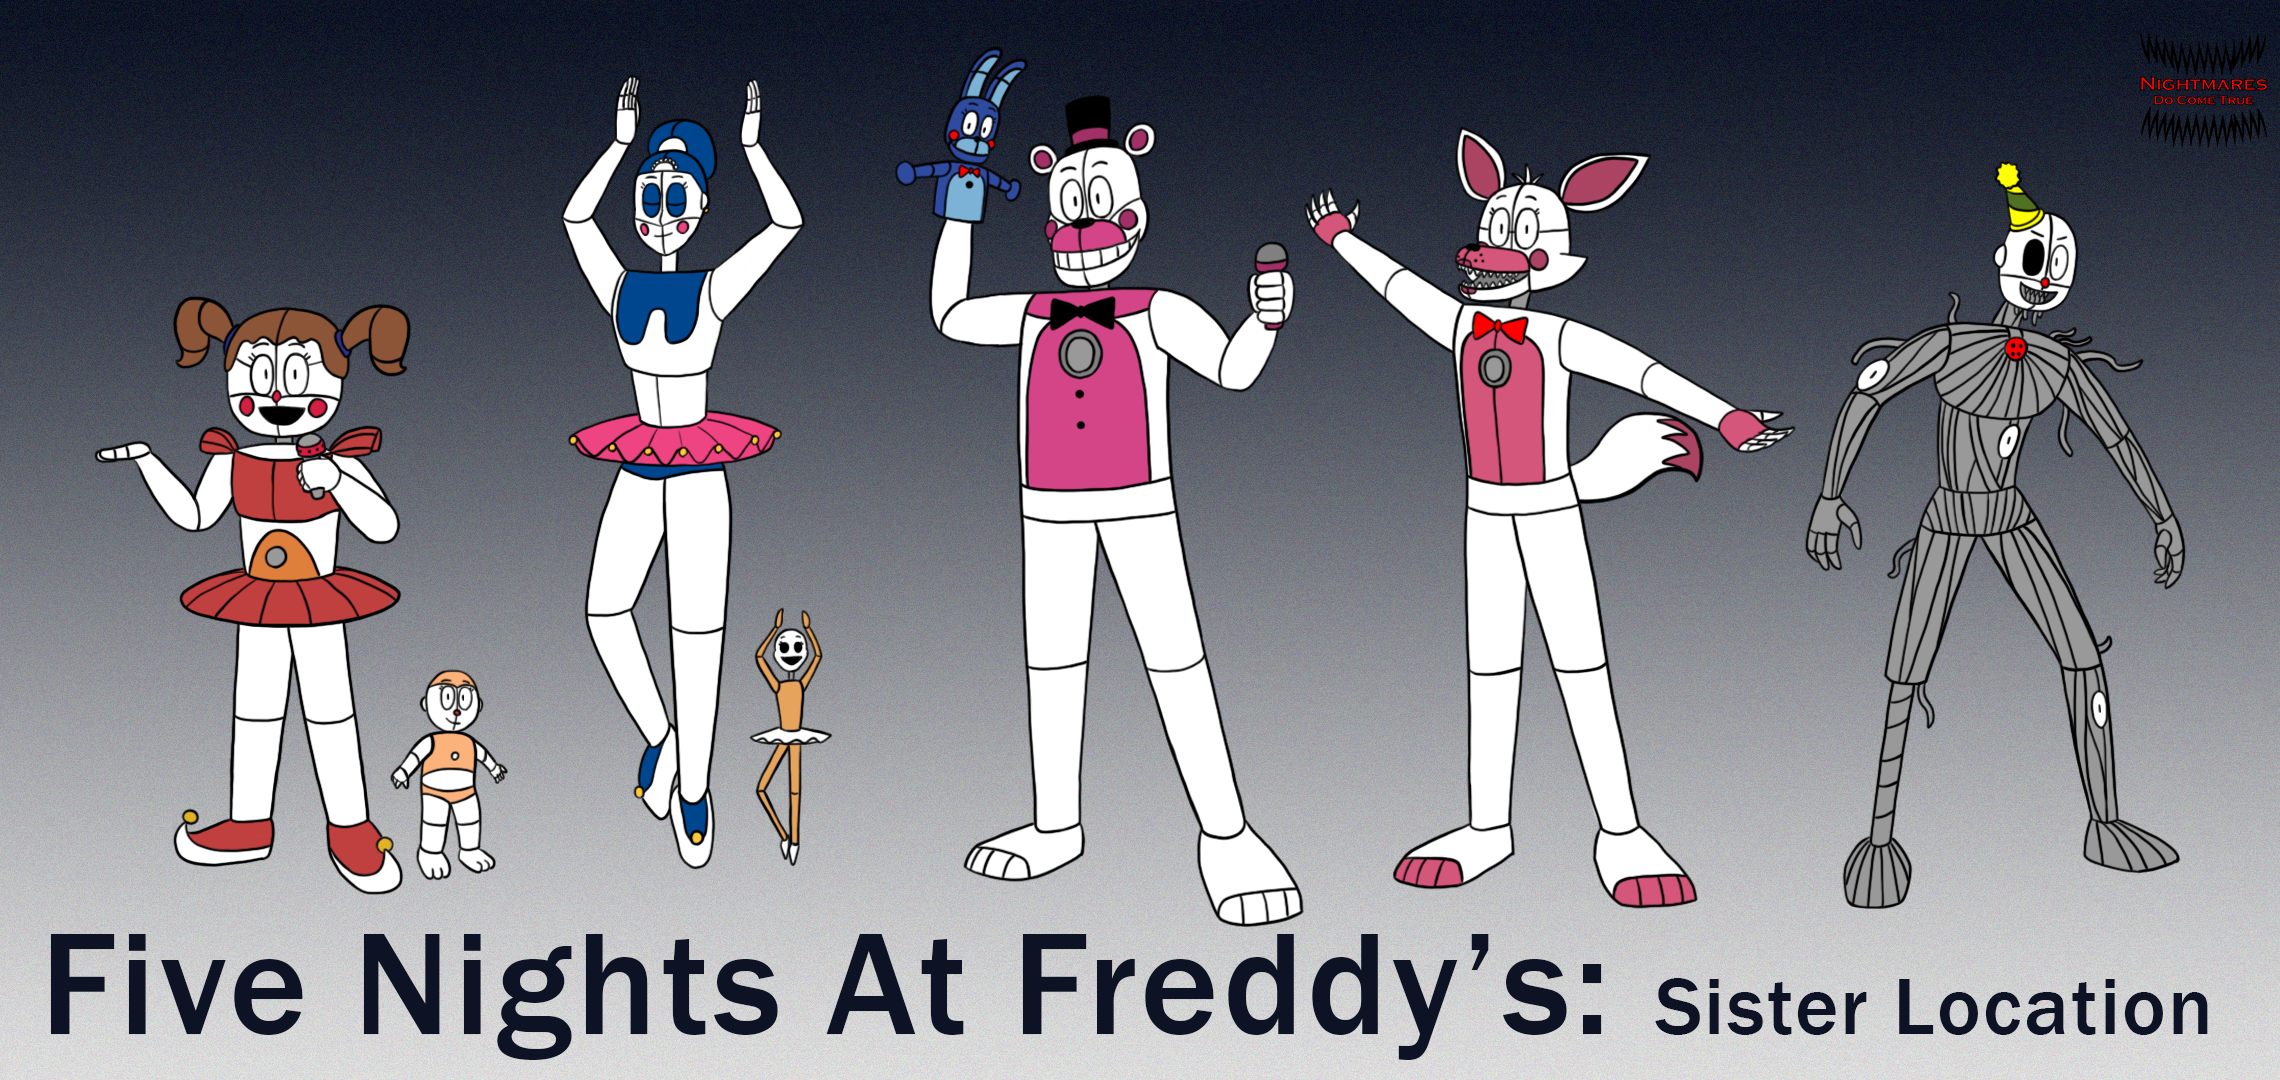 Play Five Nights At Freddy' s: Sister Location, a game of FNAF - Freddy